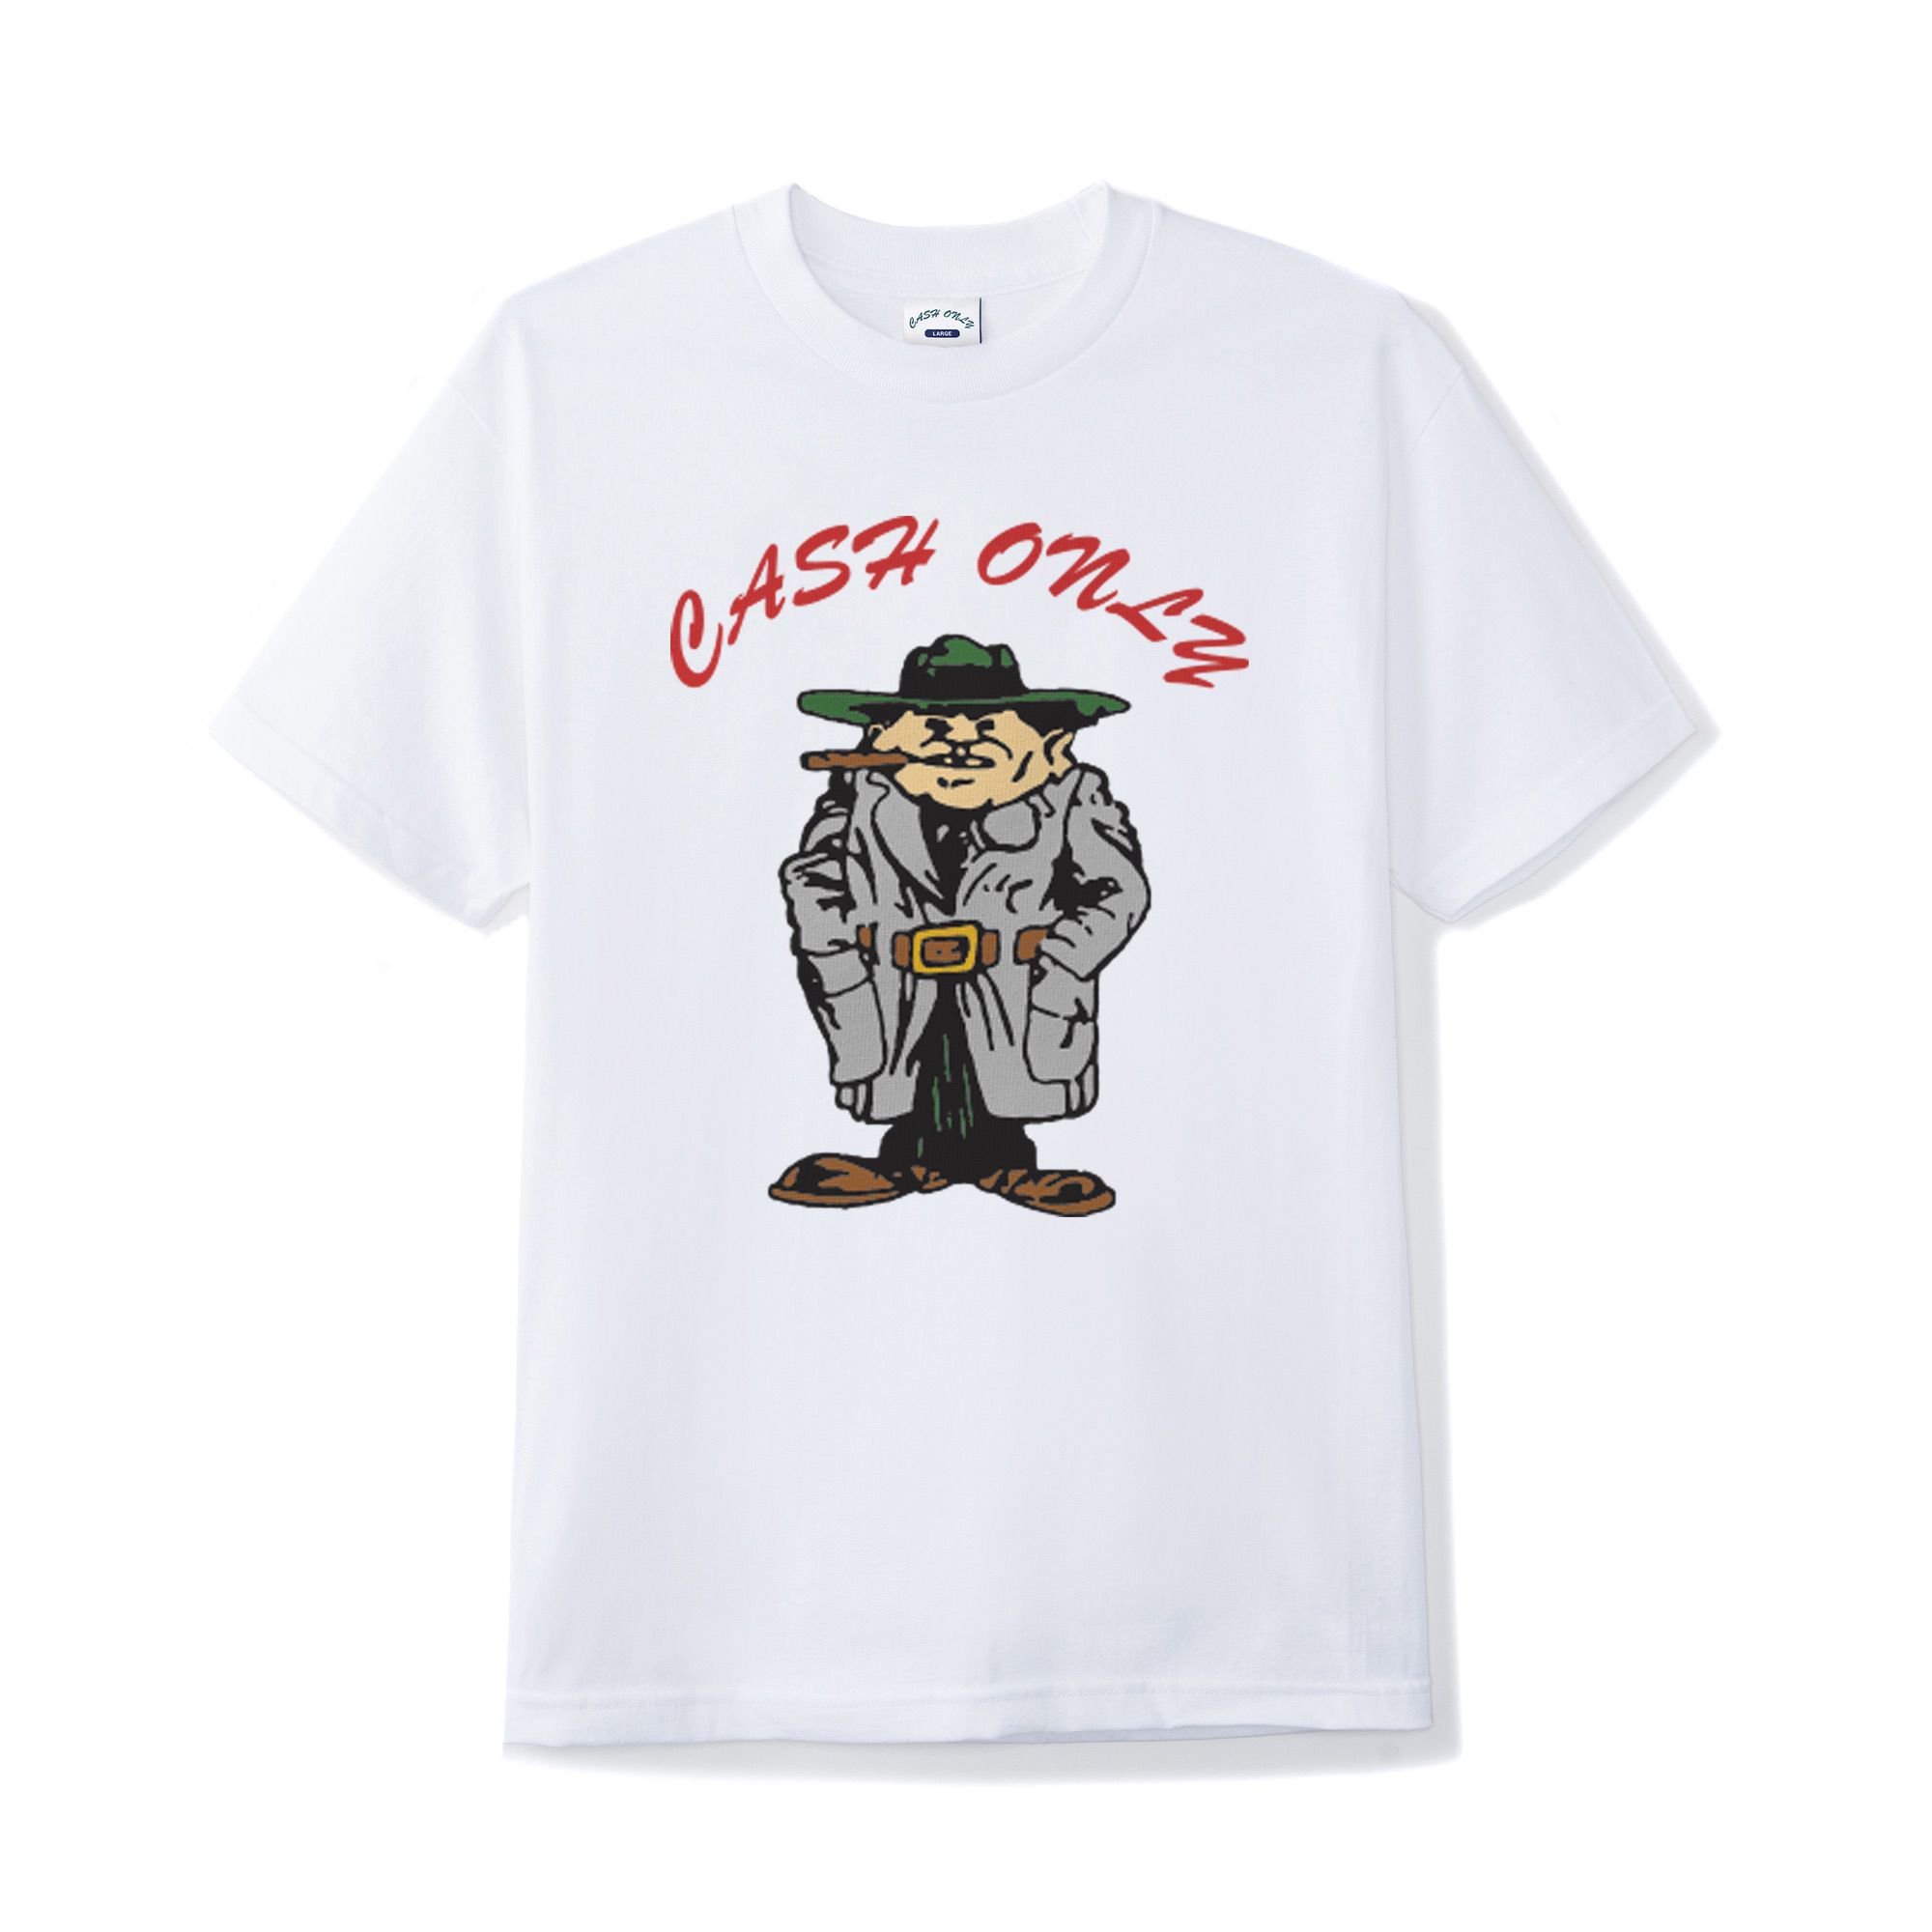 Cash Only<br>Wise Guy Tee<br>